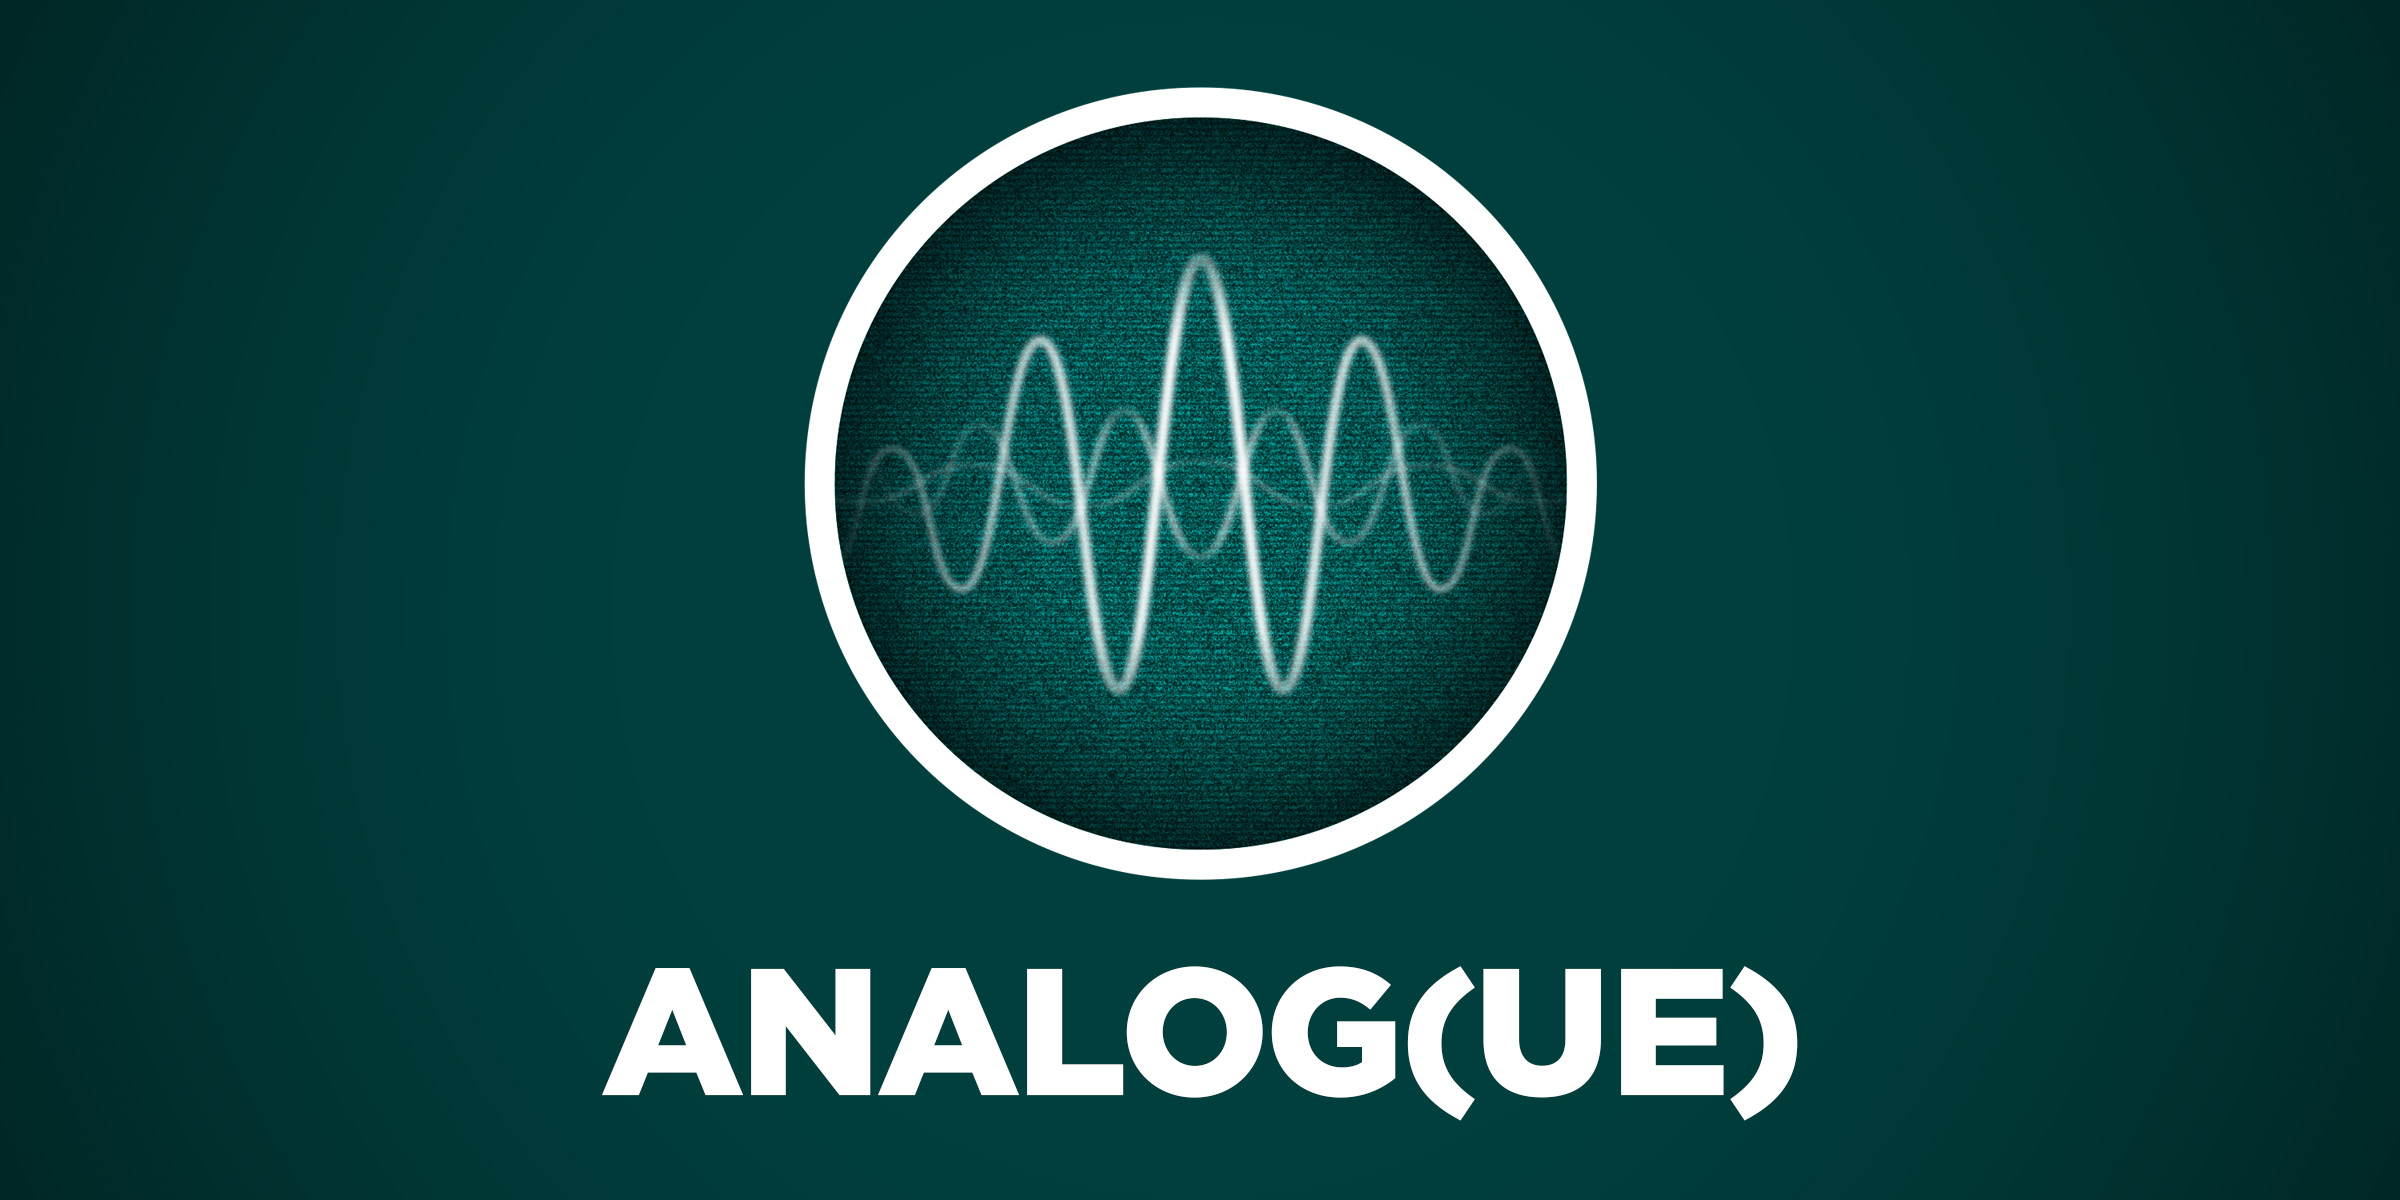 Analog(ue) #196: Why Do the Rules Exist?